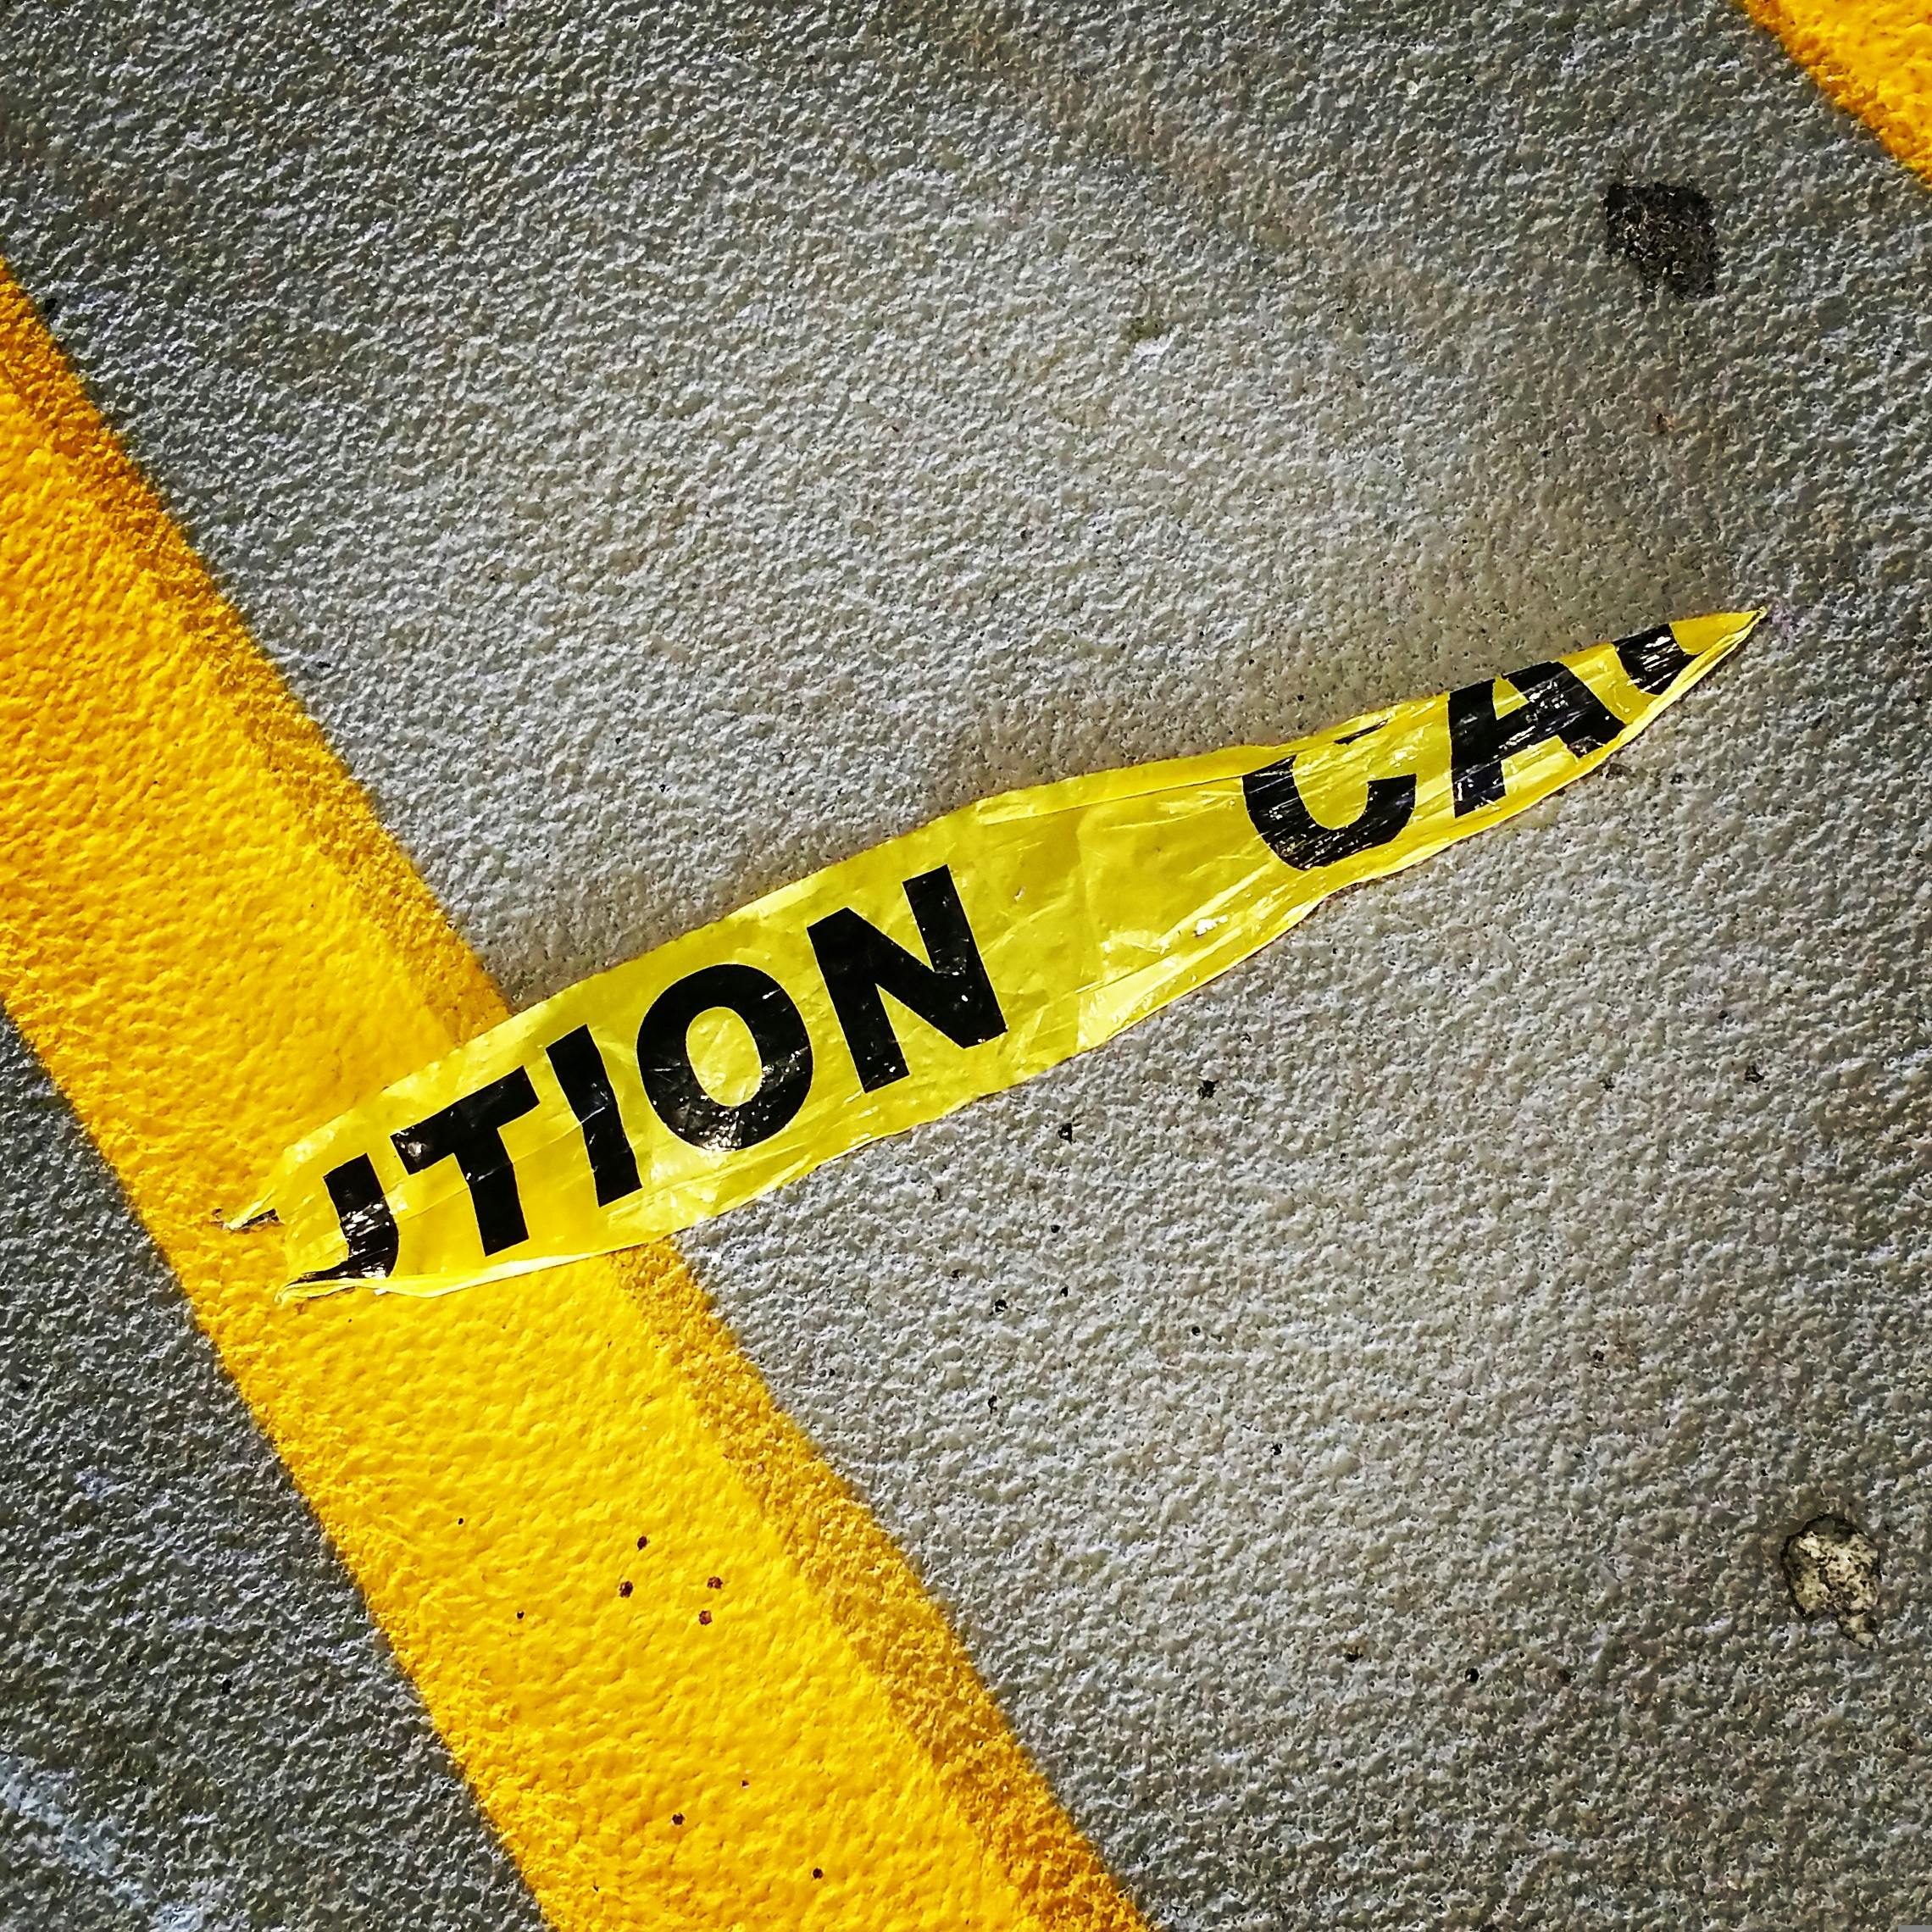 Free stock photo of caution, caution tape, parking lot